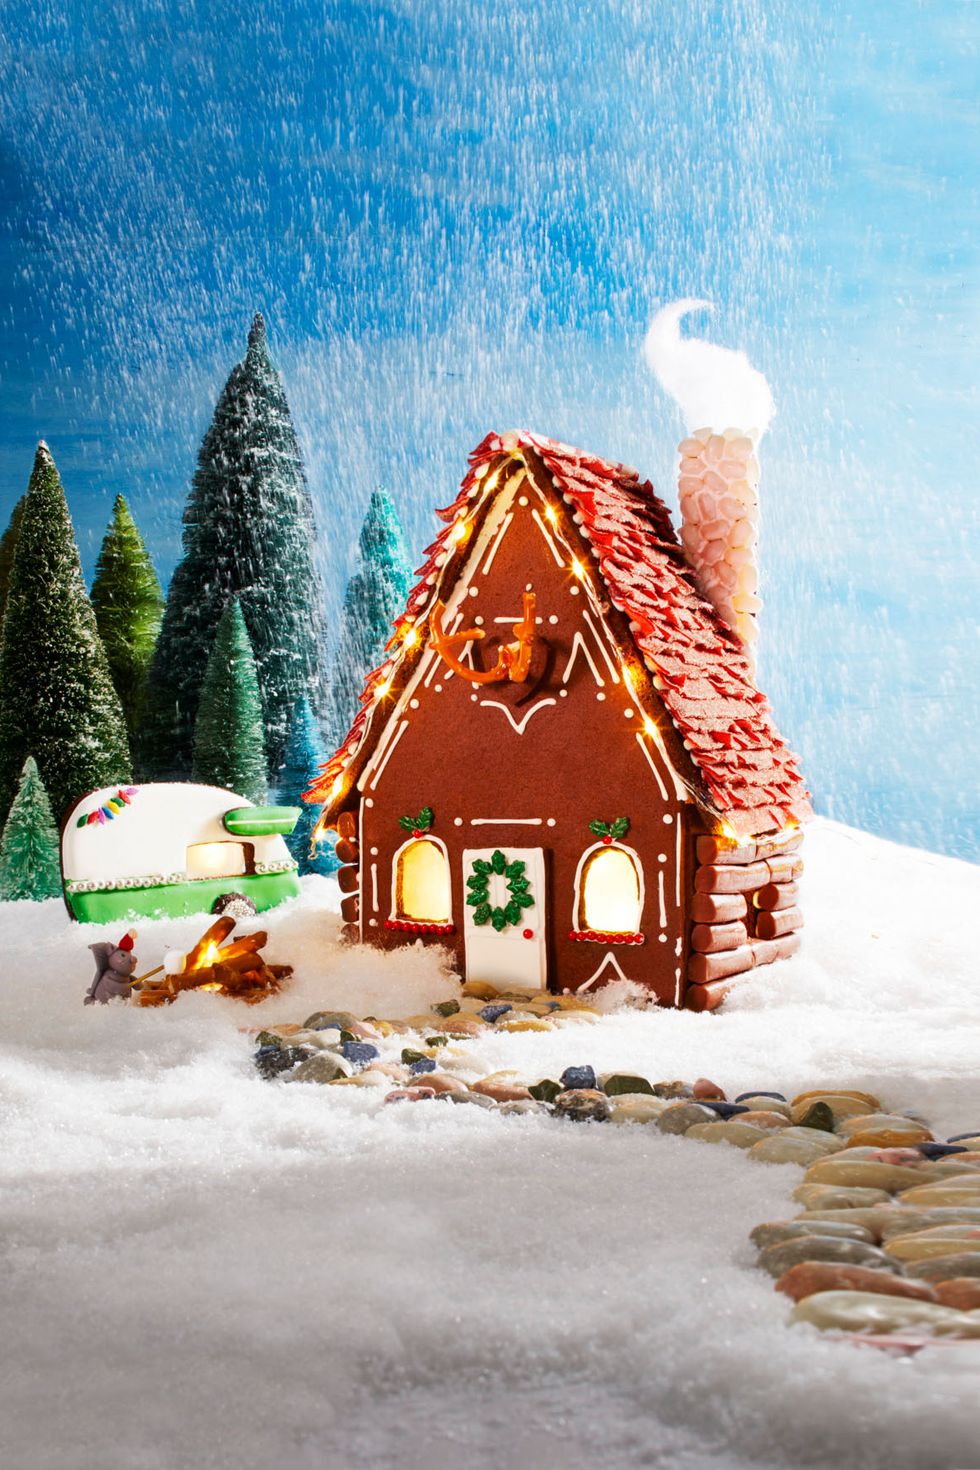 Crafty Cooking Kits Cabin in the Woods Gingerbread House, 1 Kits